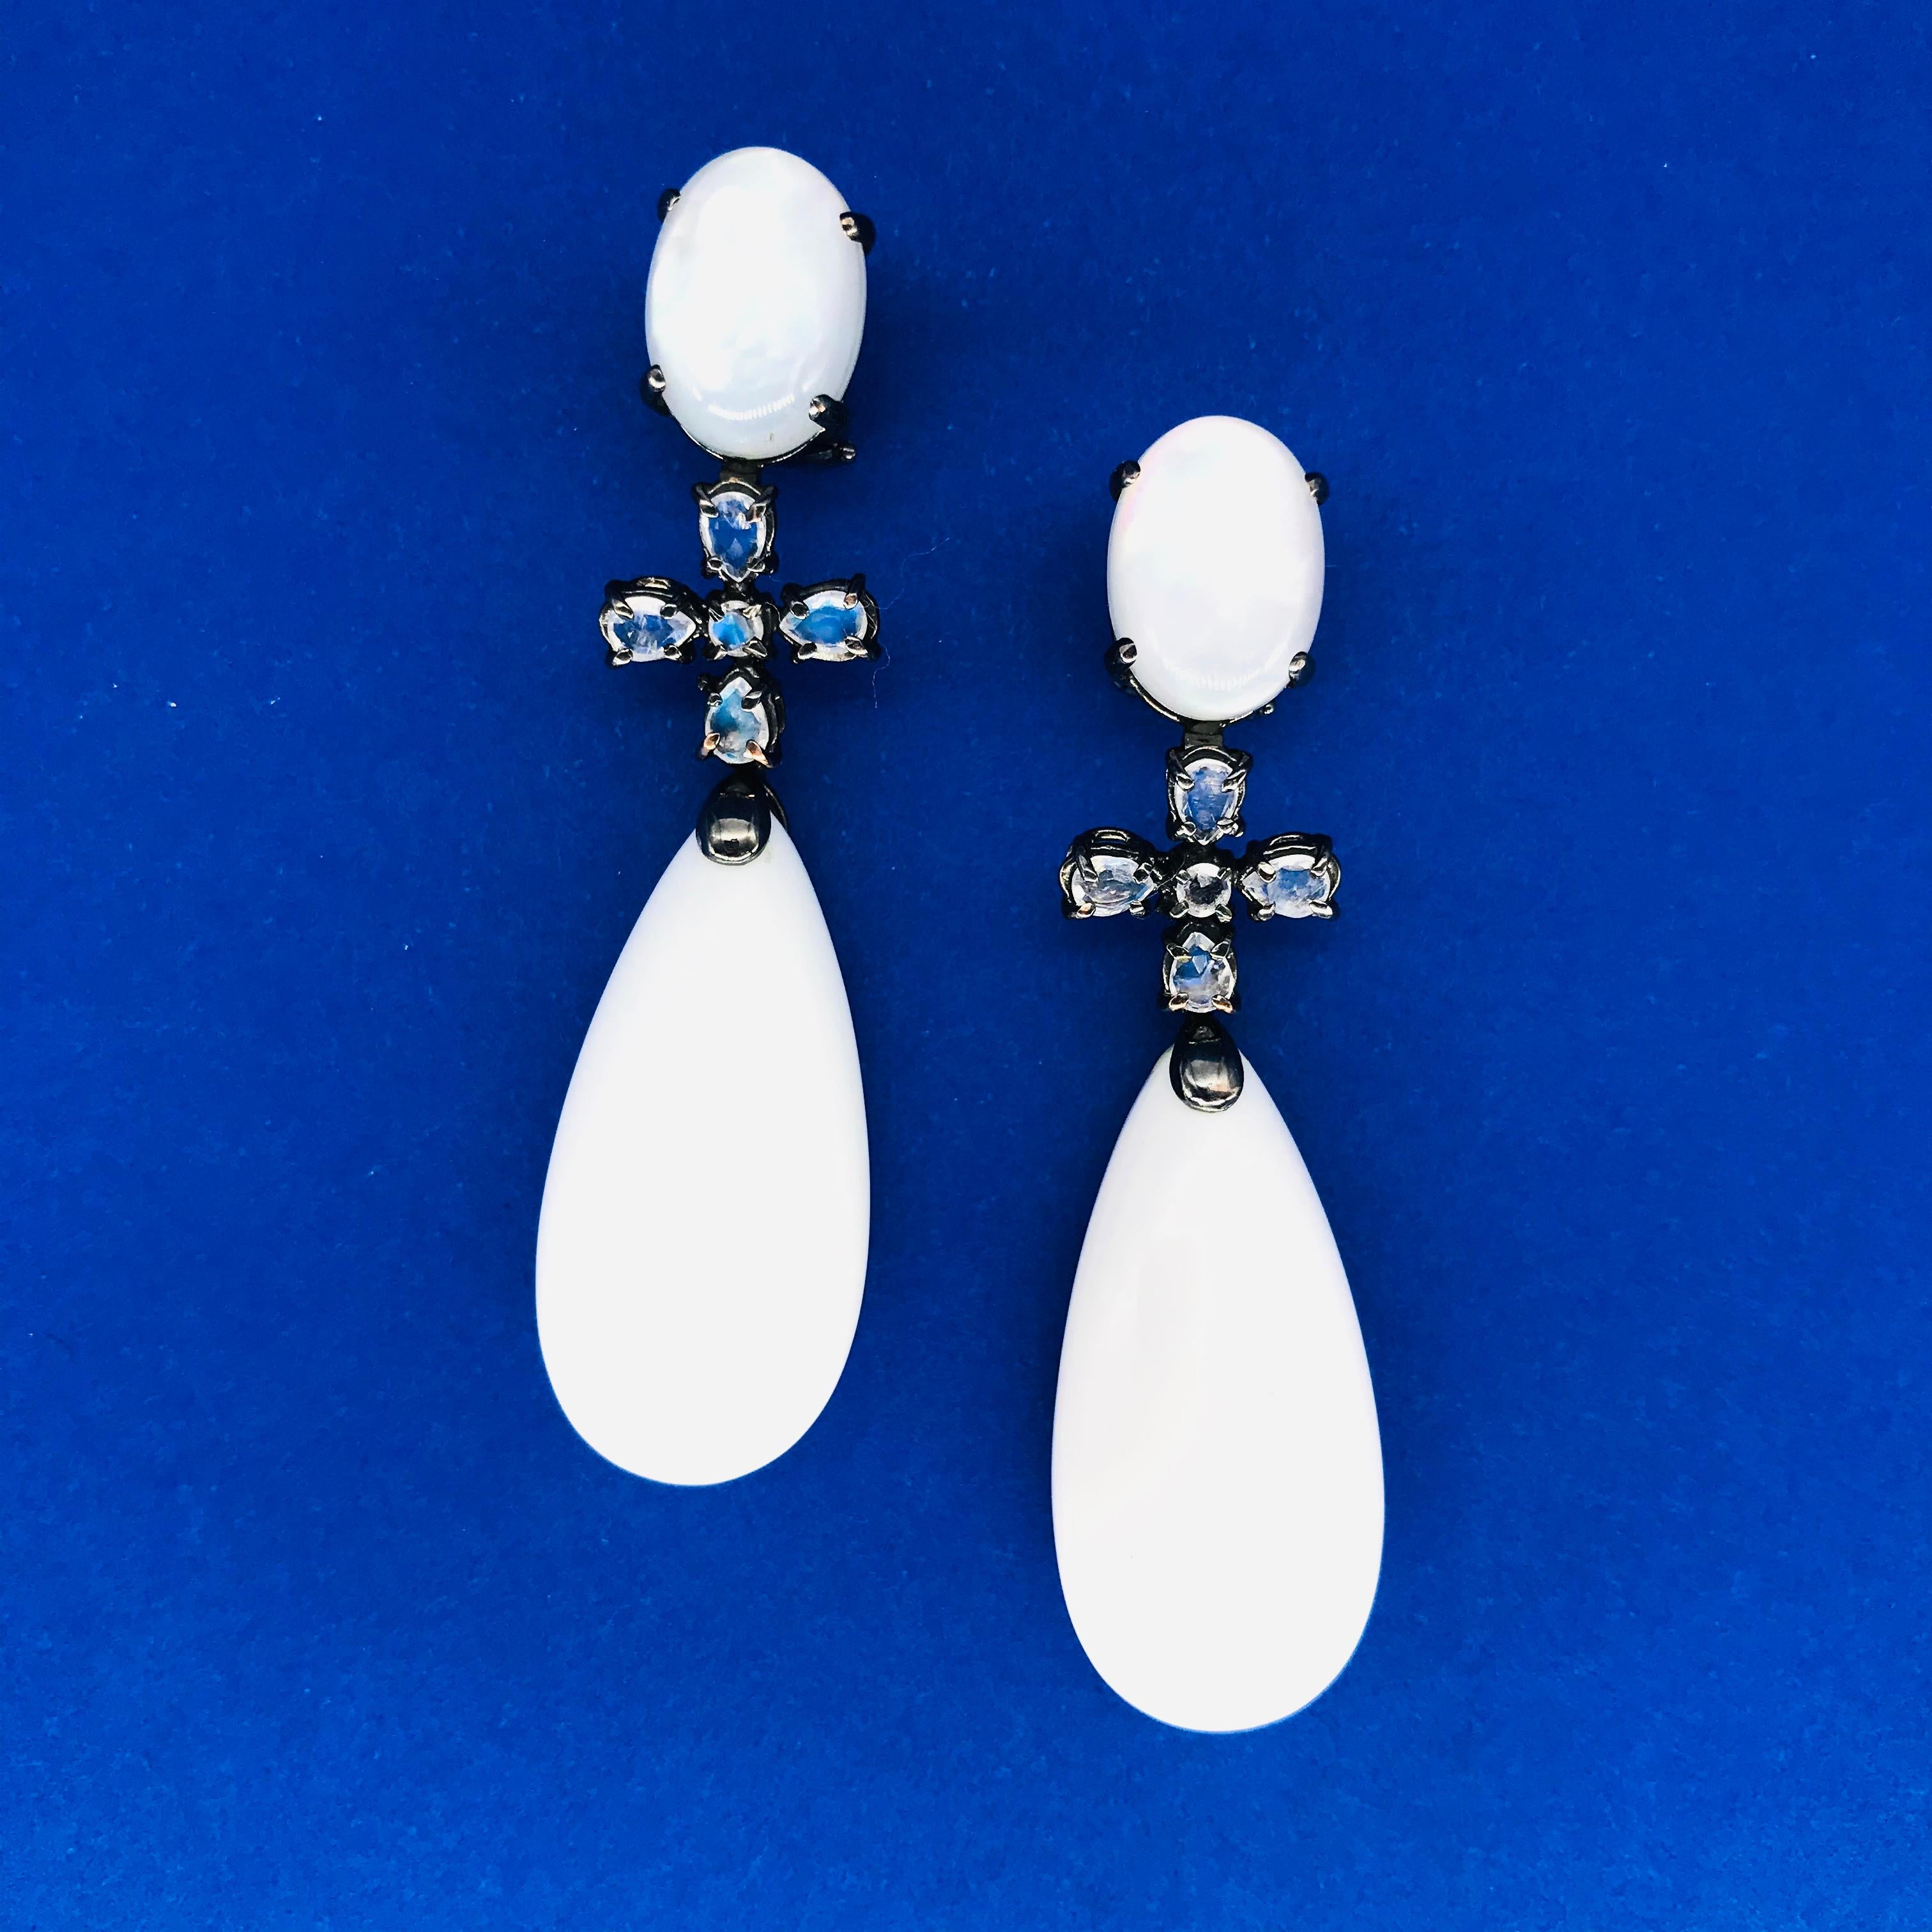 Lalino Quartz Agatha and Moonstone on Weight Black Gold Chandelier Earrings 4